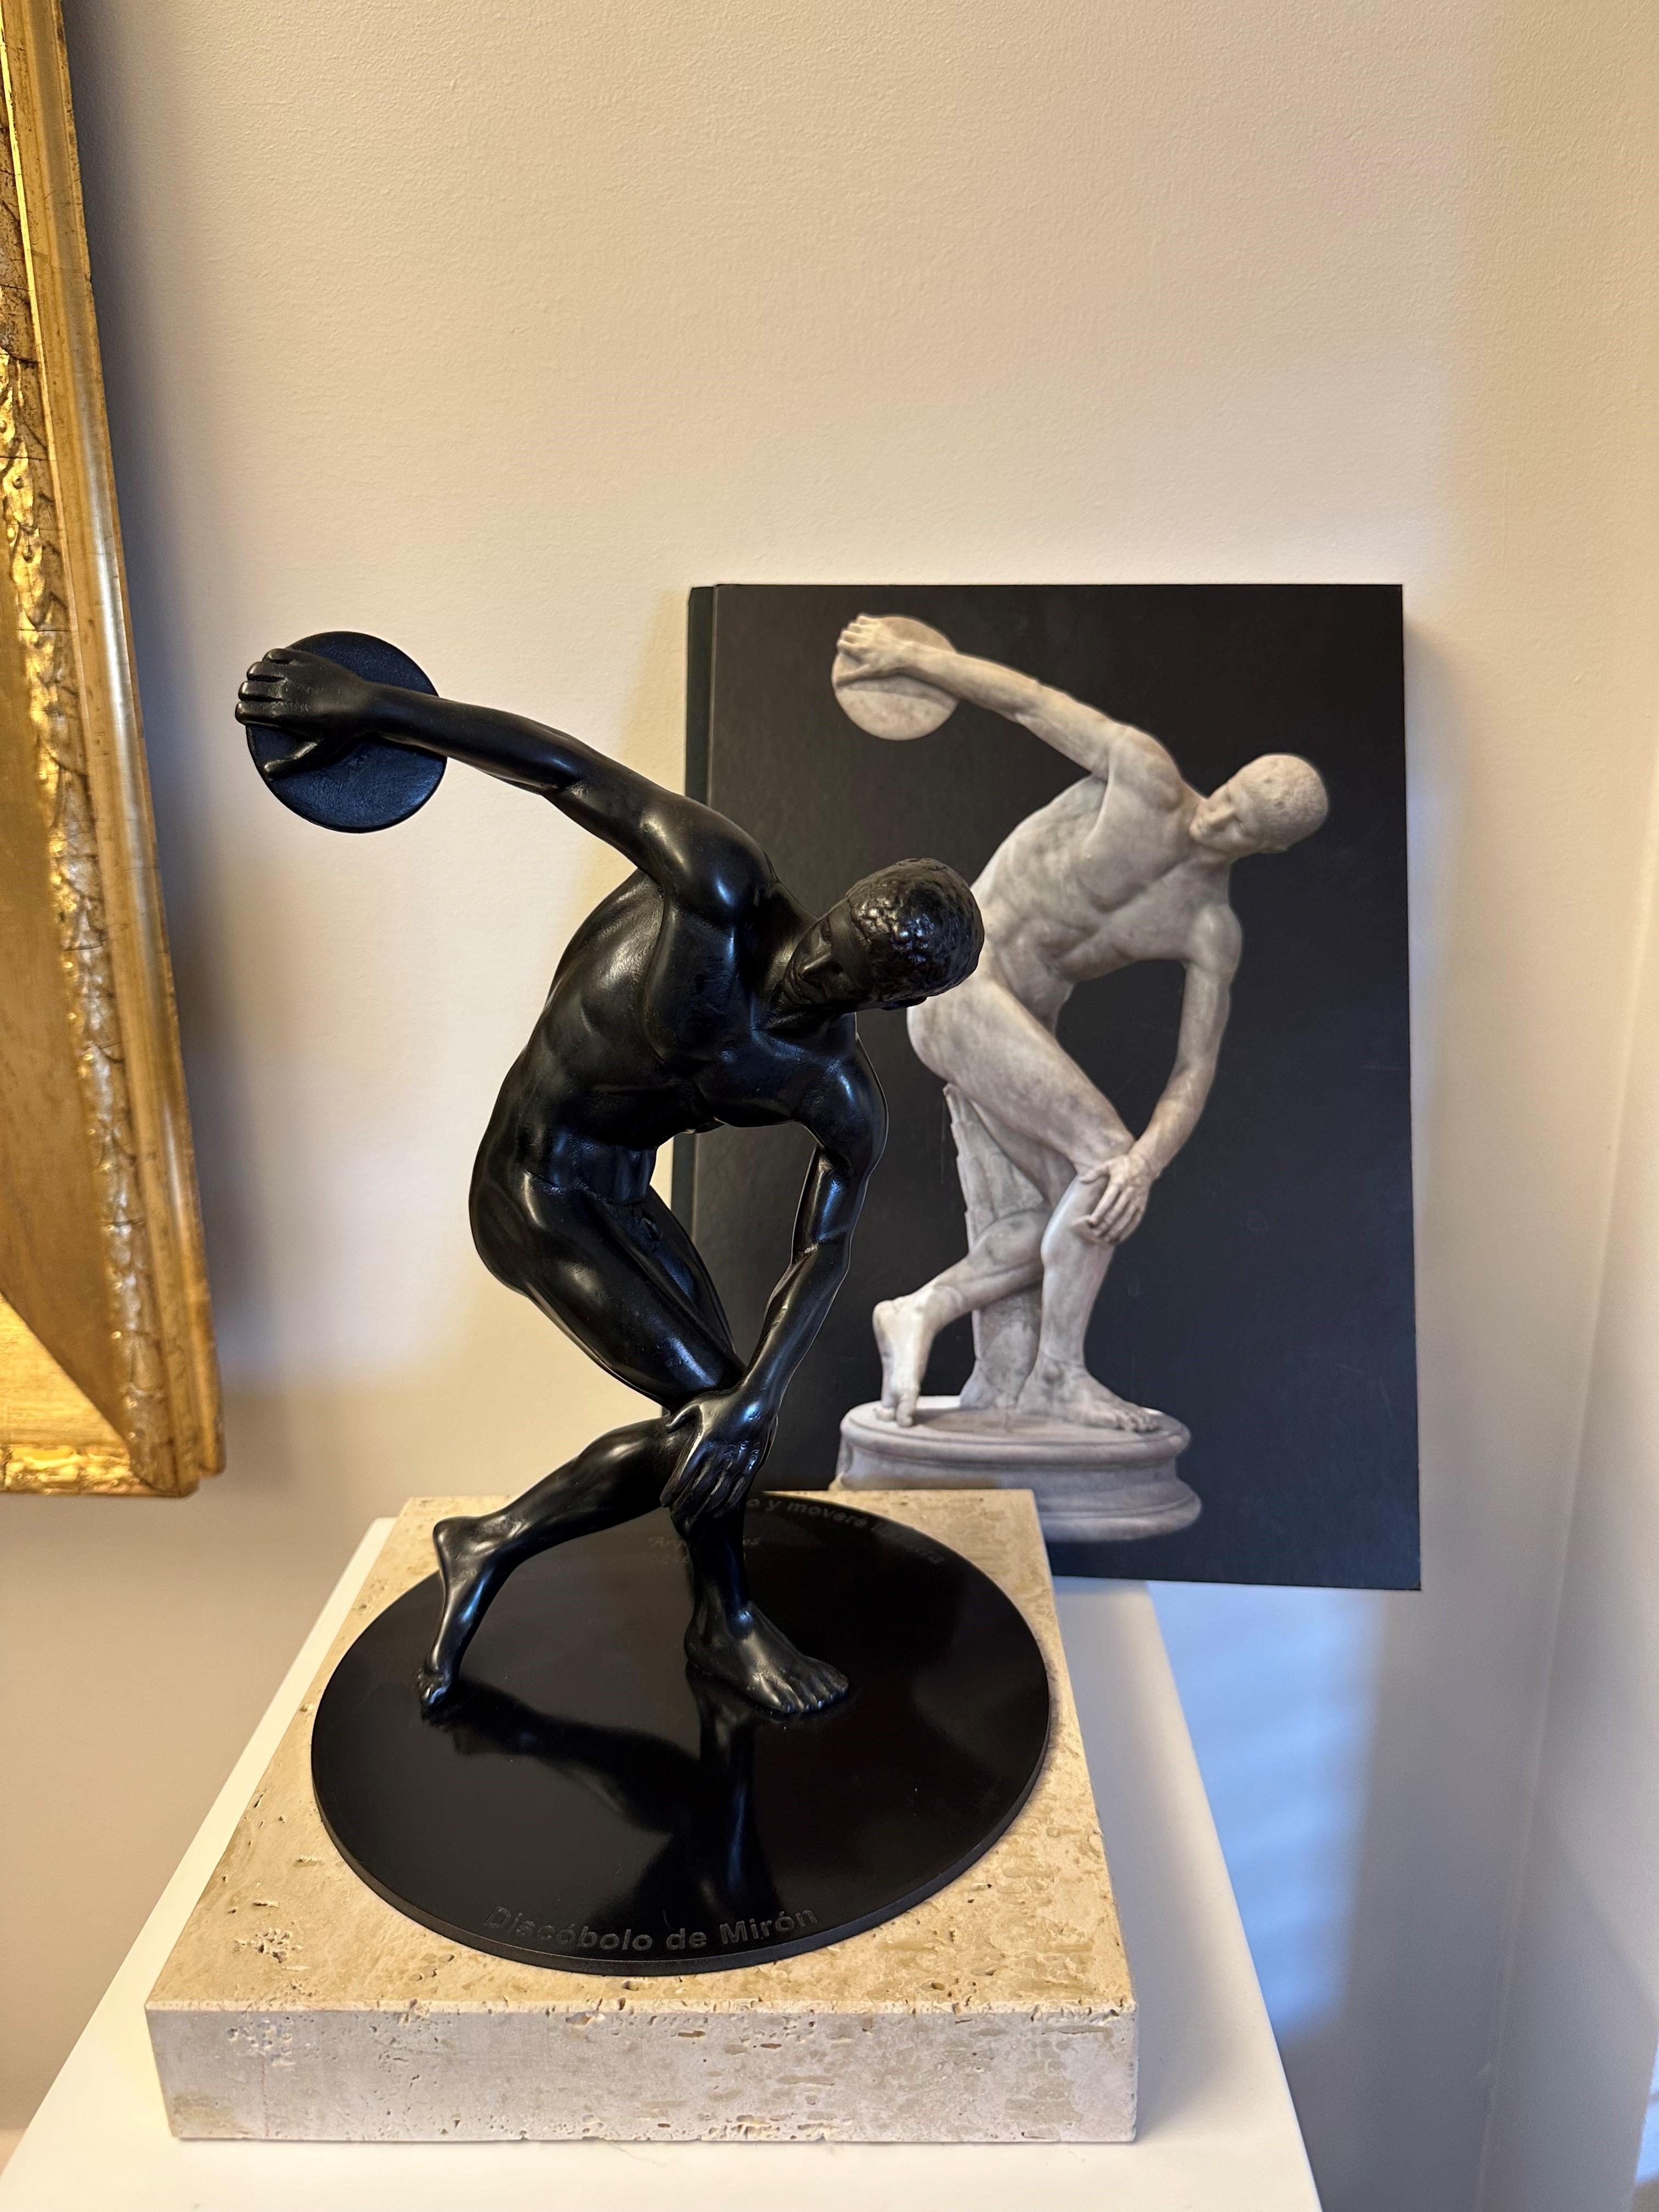 
A sculpture inspired by the lancellotti version and created following a meticulous handcrafted process, backed by the notarised certificate that accompanies the piece by Skel Art in a limited edition. Original by Miron in 455 b.c at the National